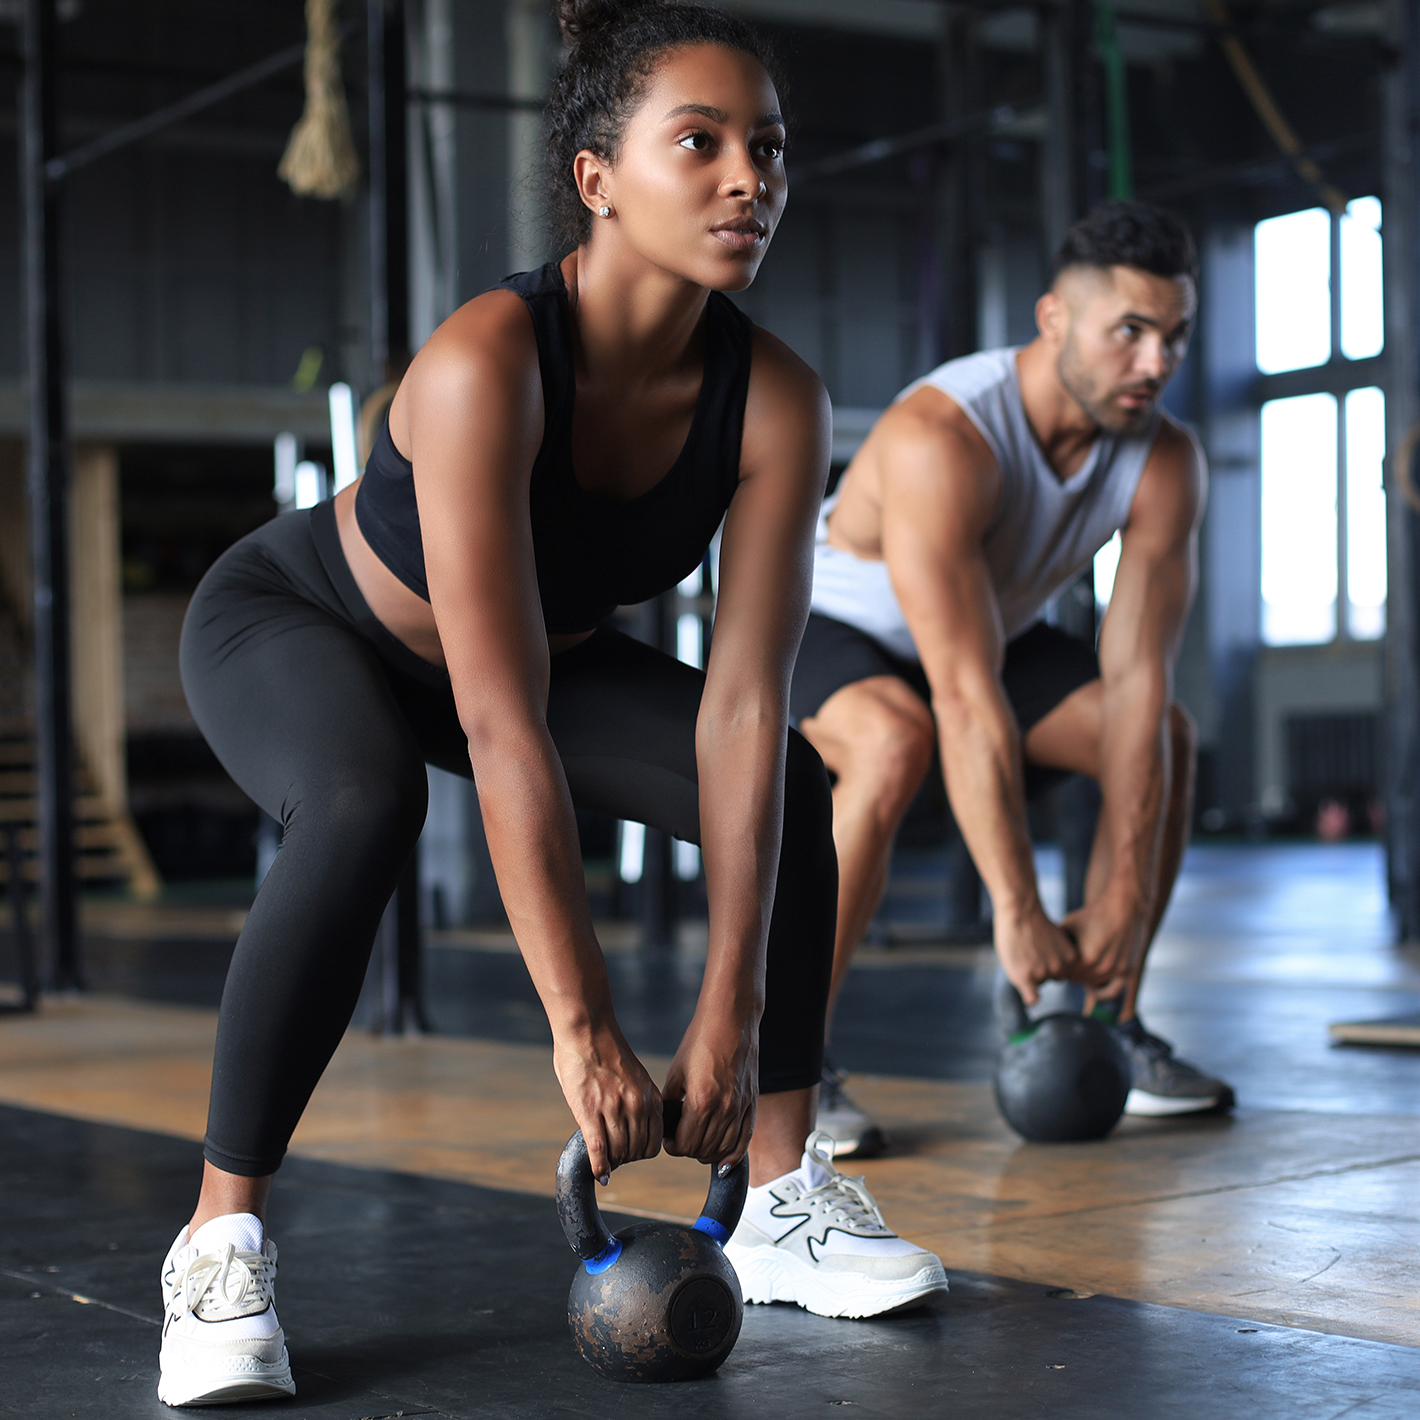 A man and a woman working out with weighted kettle bells.